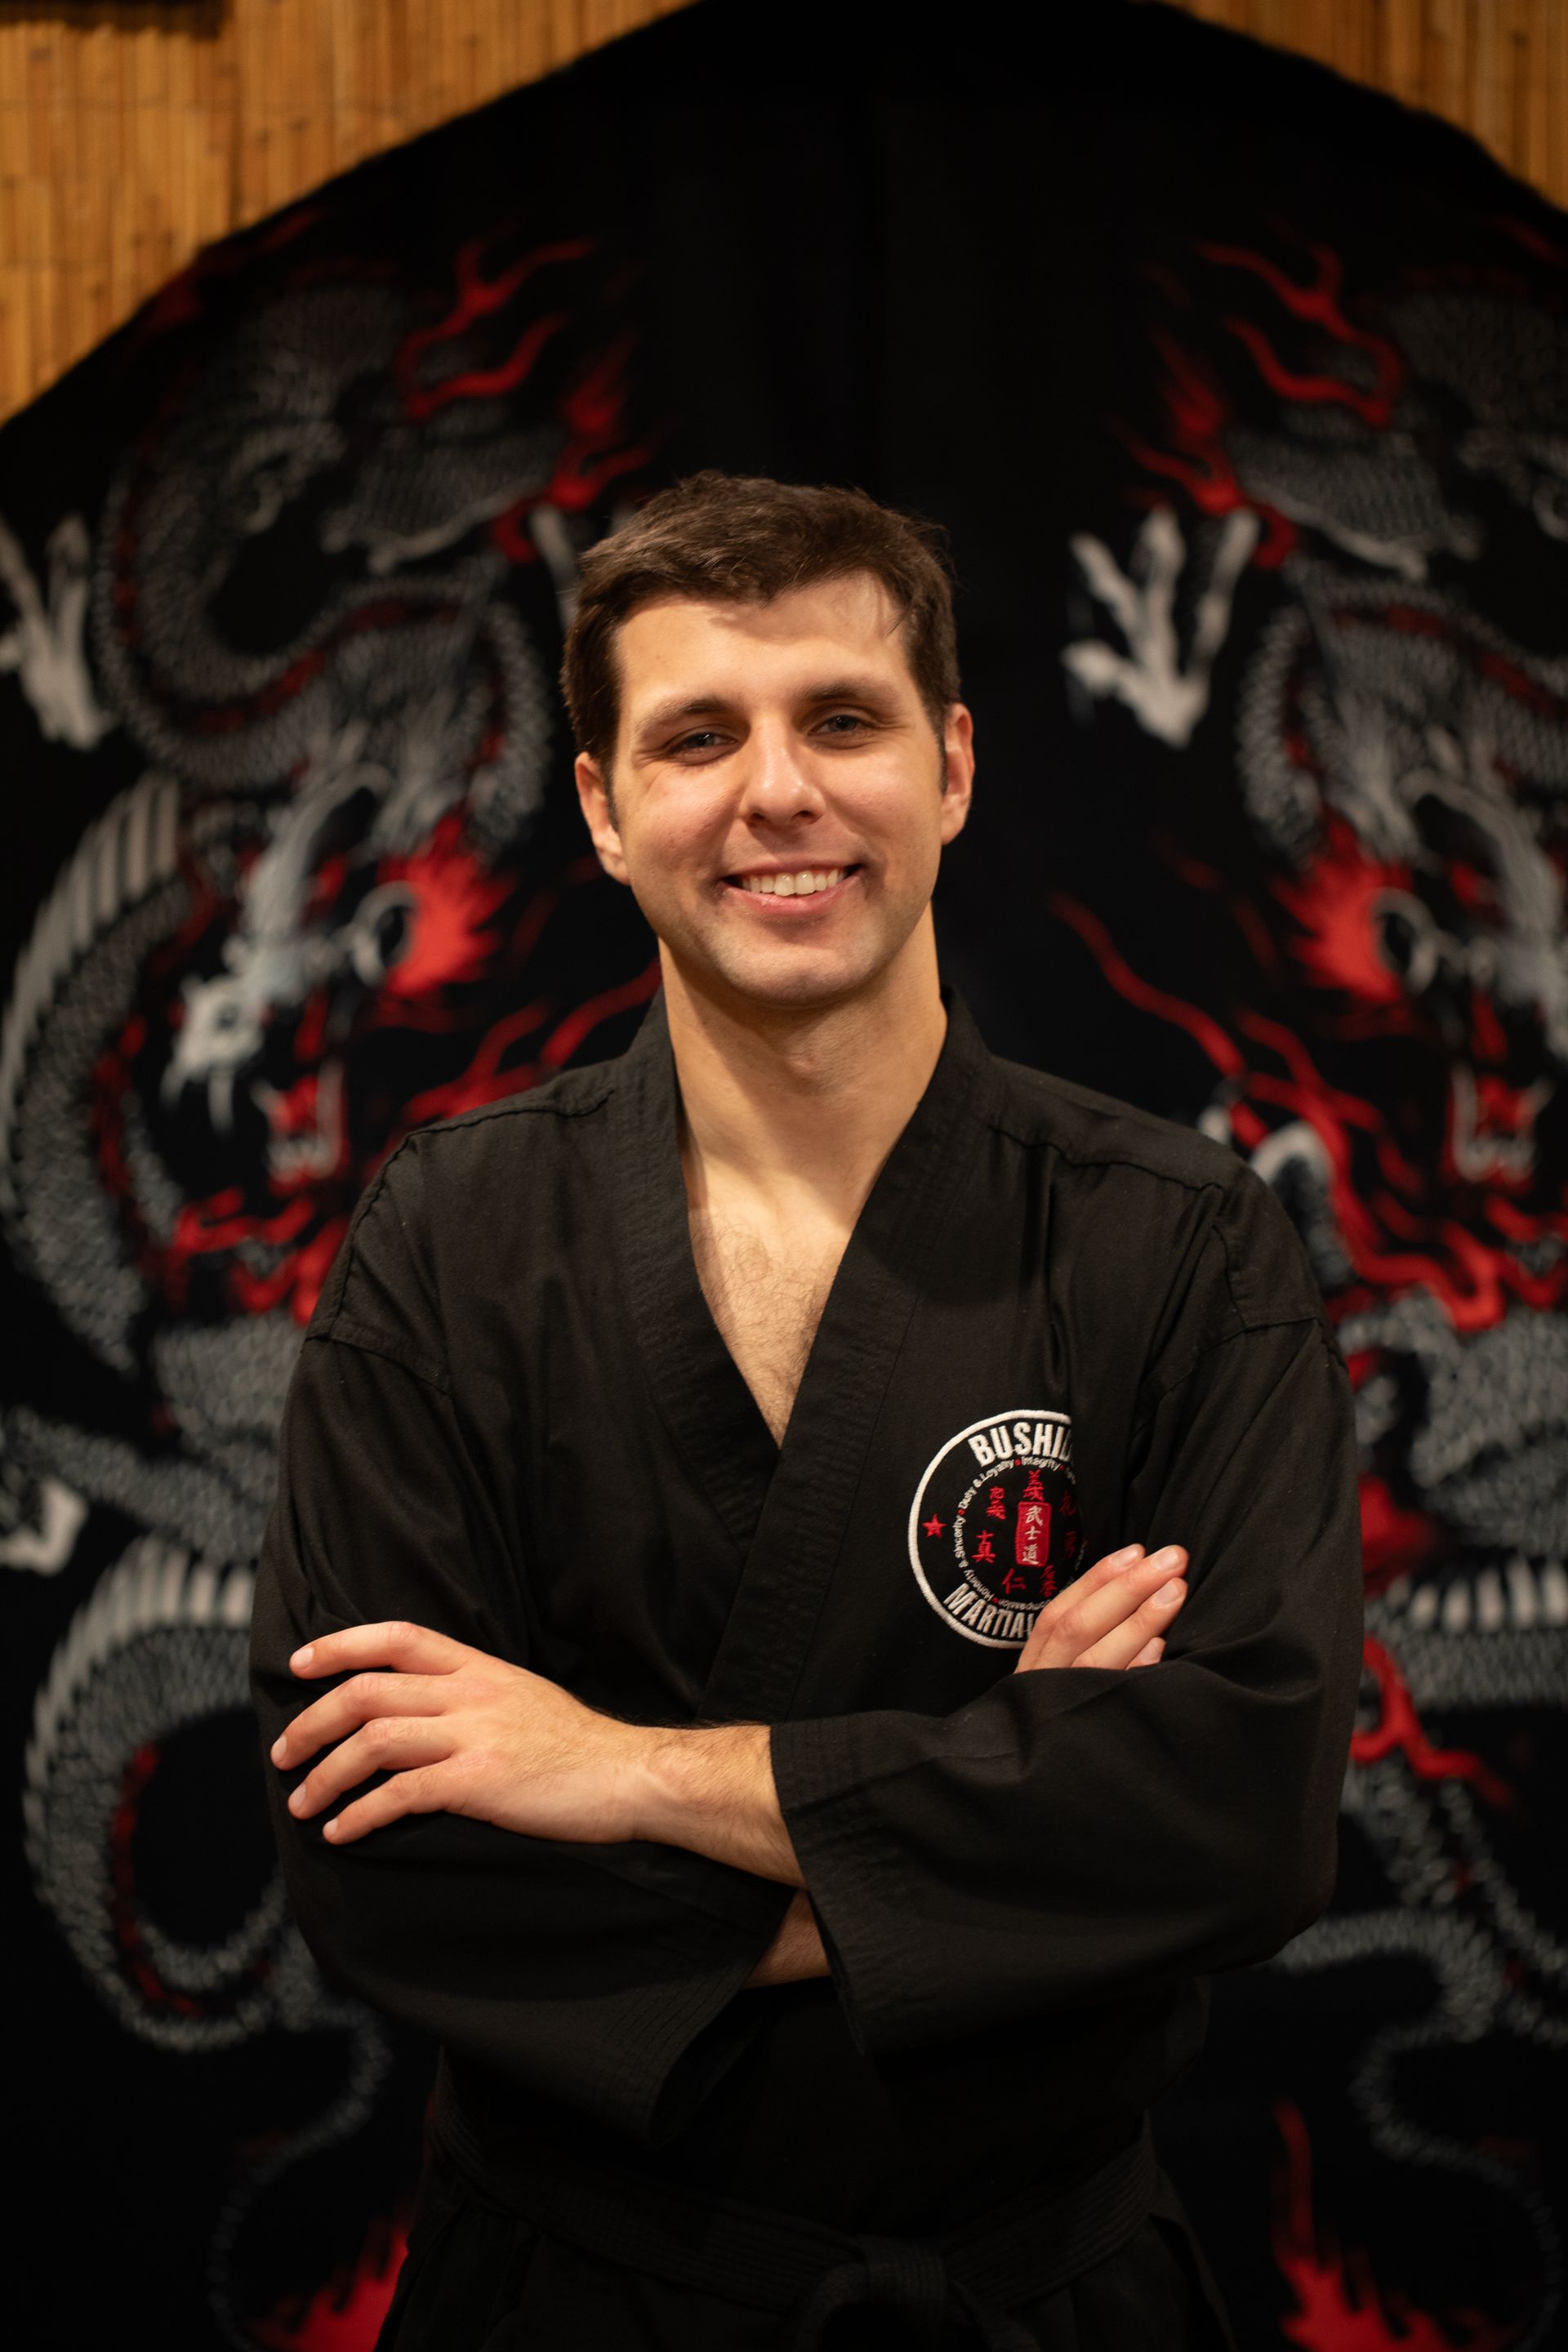 a man in a black karate uniform is smiling with his arms crossed .